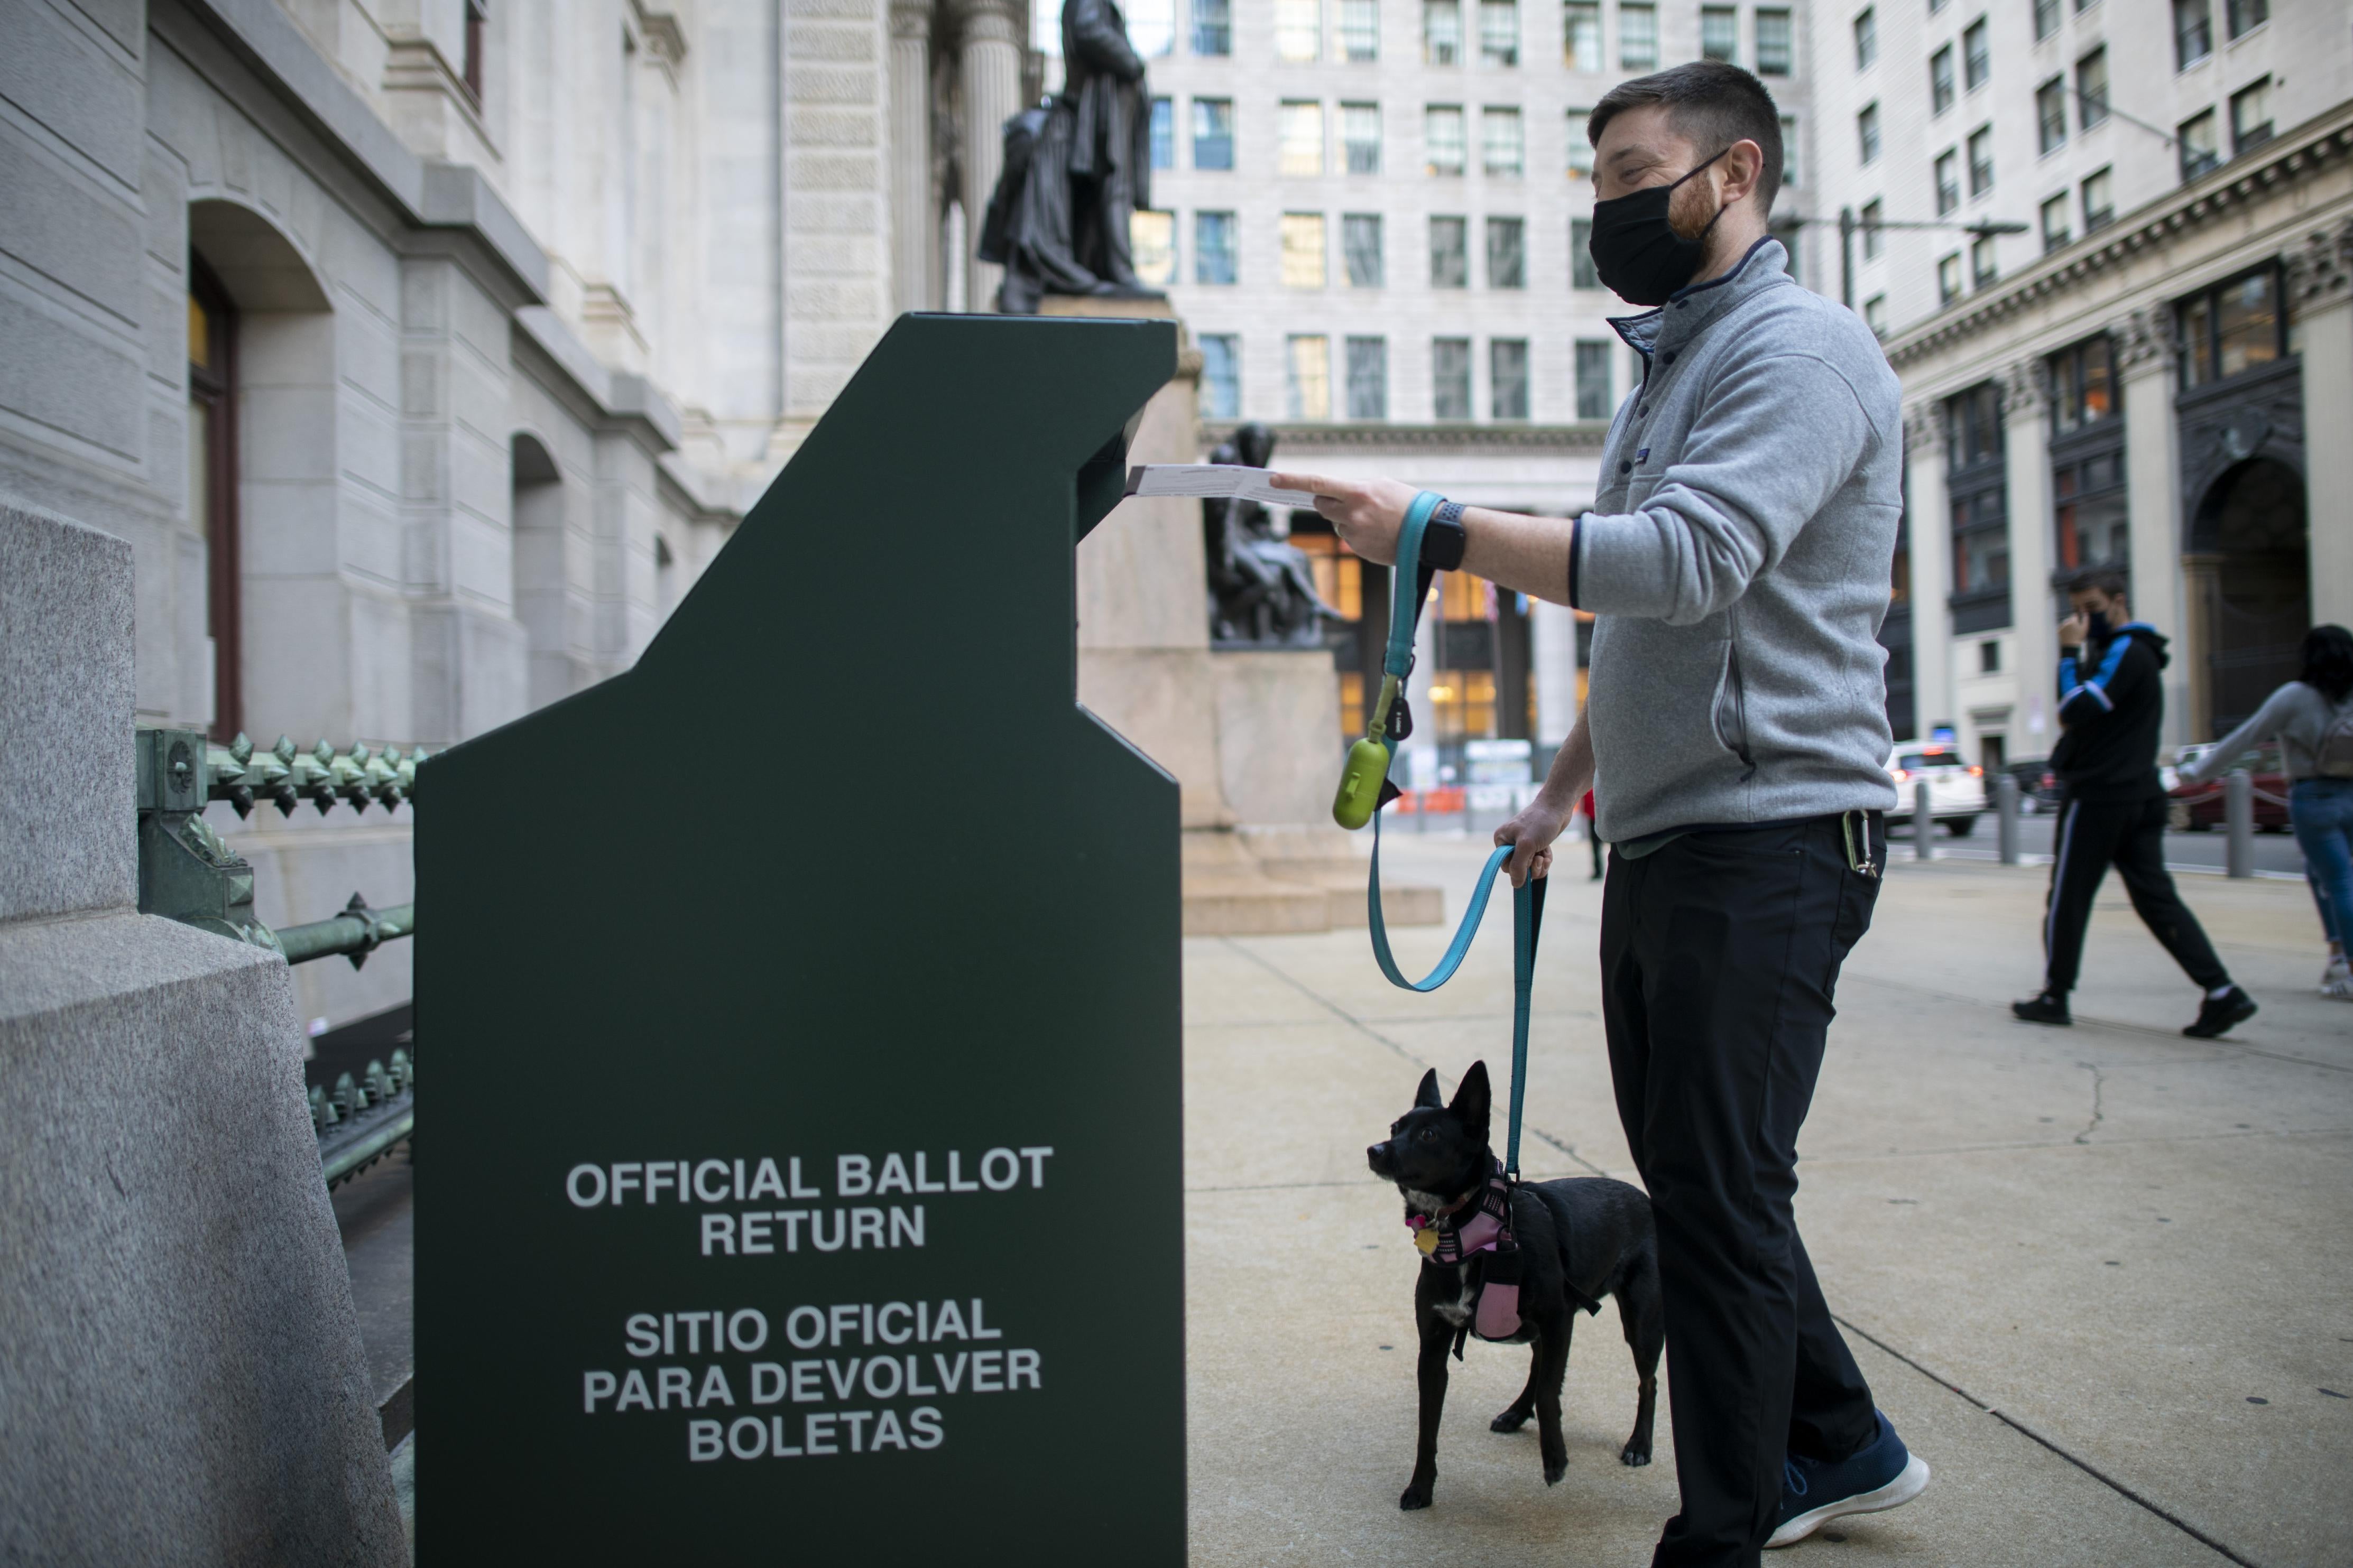 A voter casts his early voting ballot at drop box outside of City Hall on October 17, 2020 in Philadelphia, Pennsylvania.  With the election only a little more than two weeks away, a new form of in-person early voting by using mail ballots, has enabled millions of voters to already cast their ballots.  President Donald Trump won the battleground state of Pennsylvania by only 44,000 votes in 2016, the first Republican to do so since President George Bush in 1988.  (Photo by Mark Makela/Getty Images)